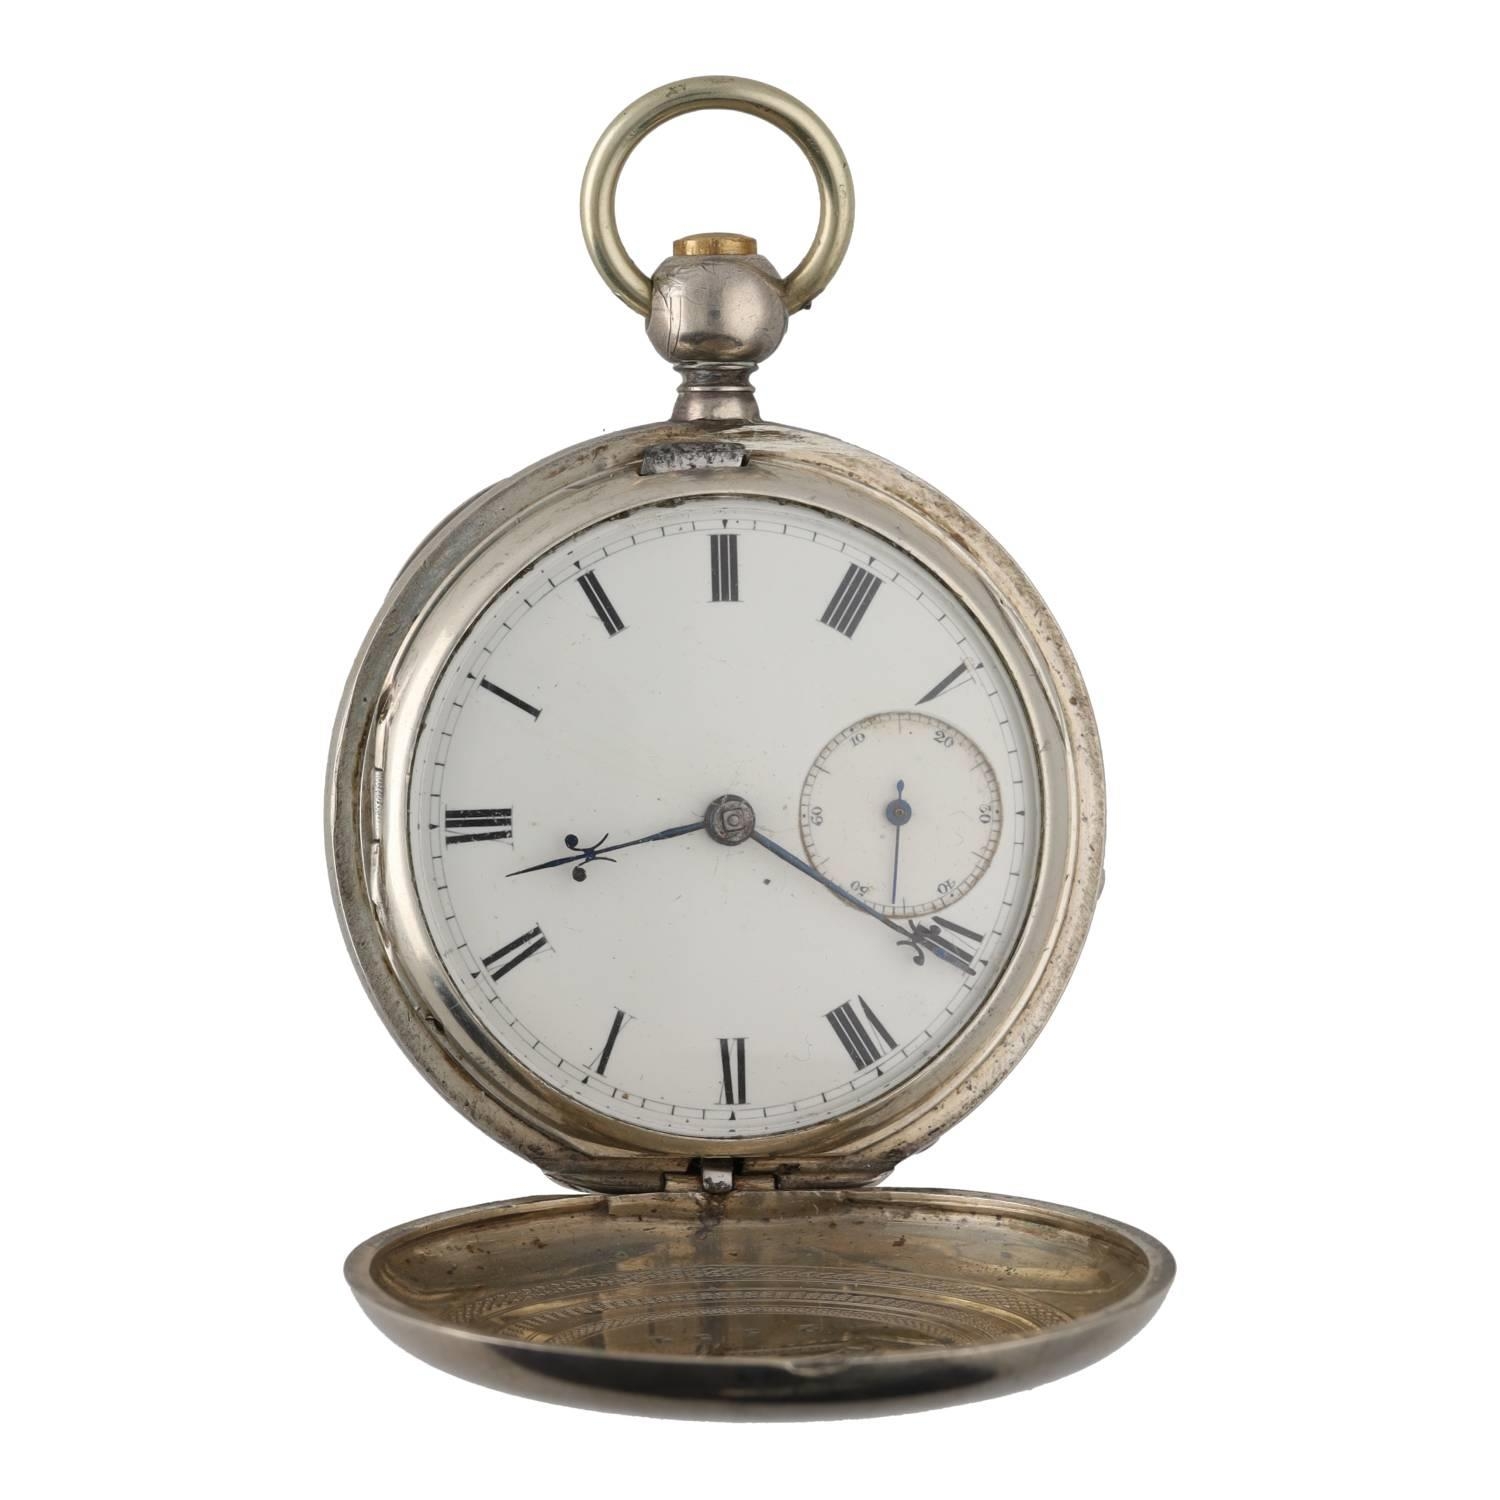 Early American Waltham 'P.S. Bartlett' lever hunter pocket watch, circa 1864, serial no. 148734, - Image 2 of 5